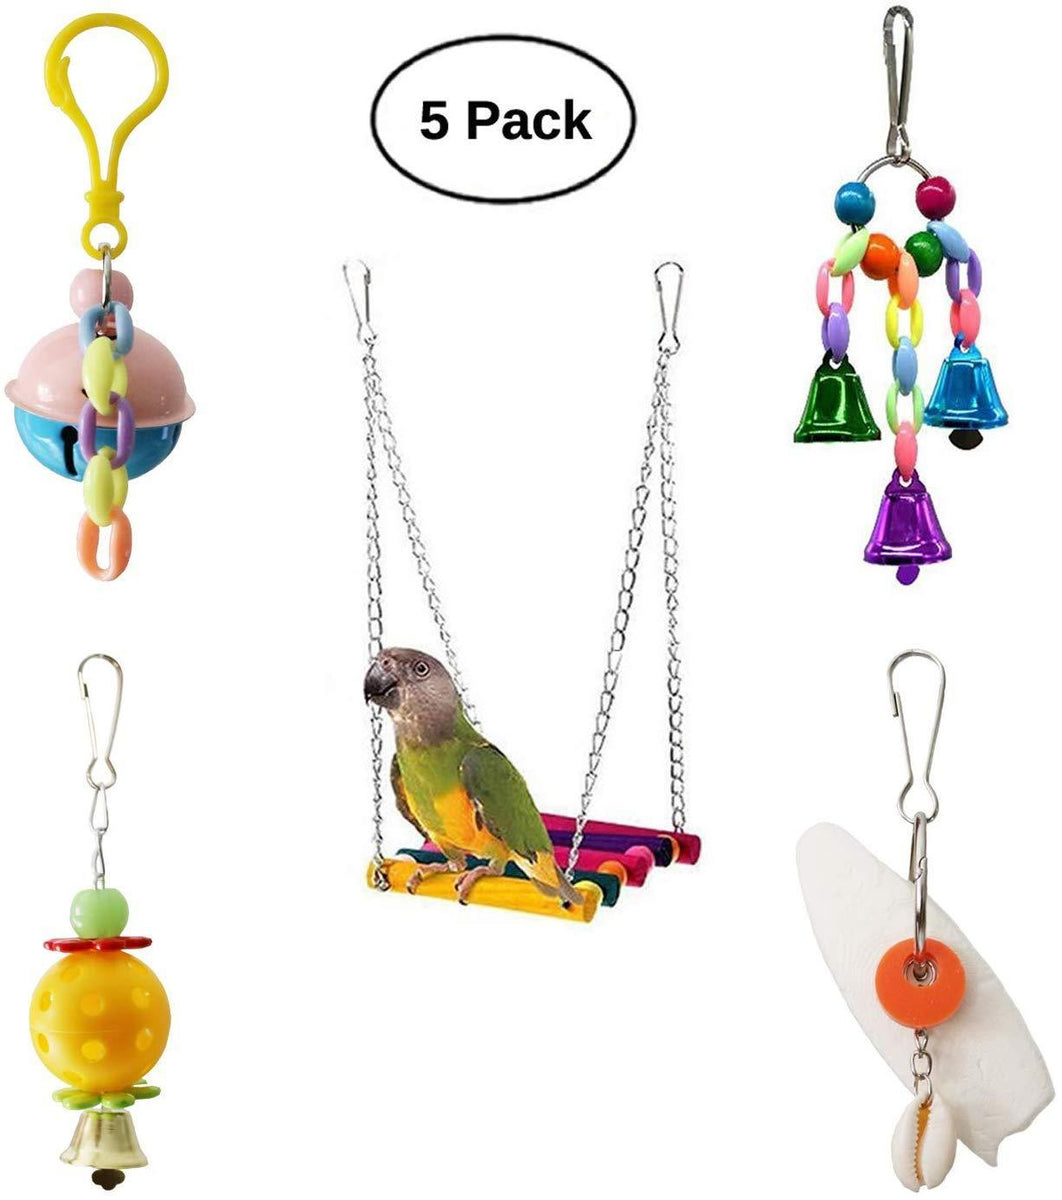 BWOGUE 5pcs Bird Parrot Toys Hanging Bell Pet Bird Cage Hammock Swing Toy  Hanging Toy for